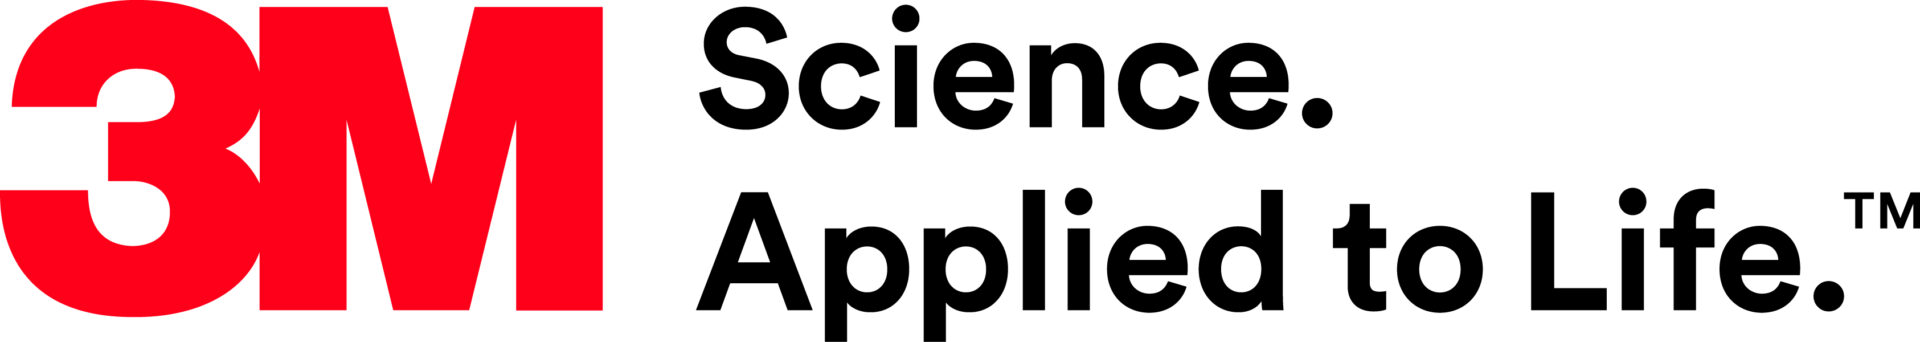 3m science applied to life logo.